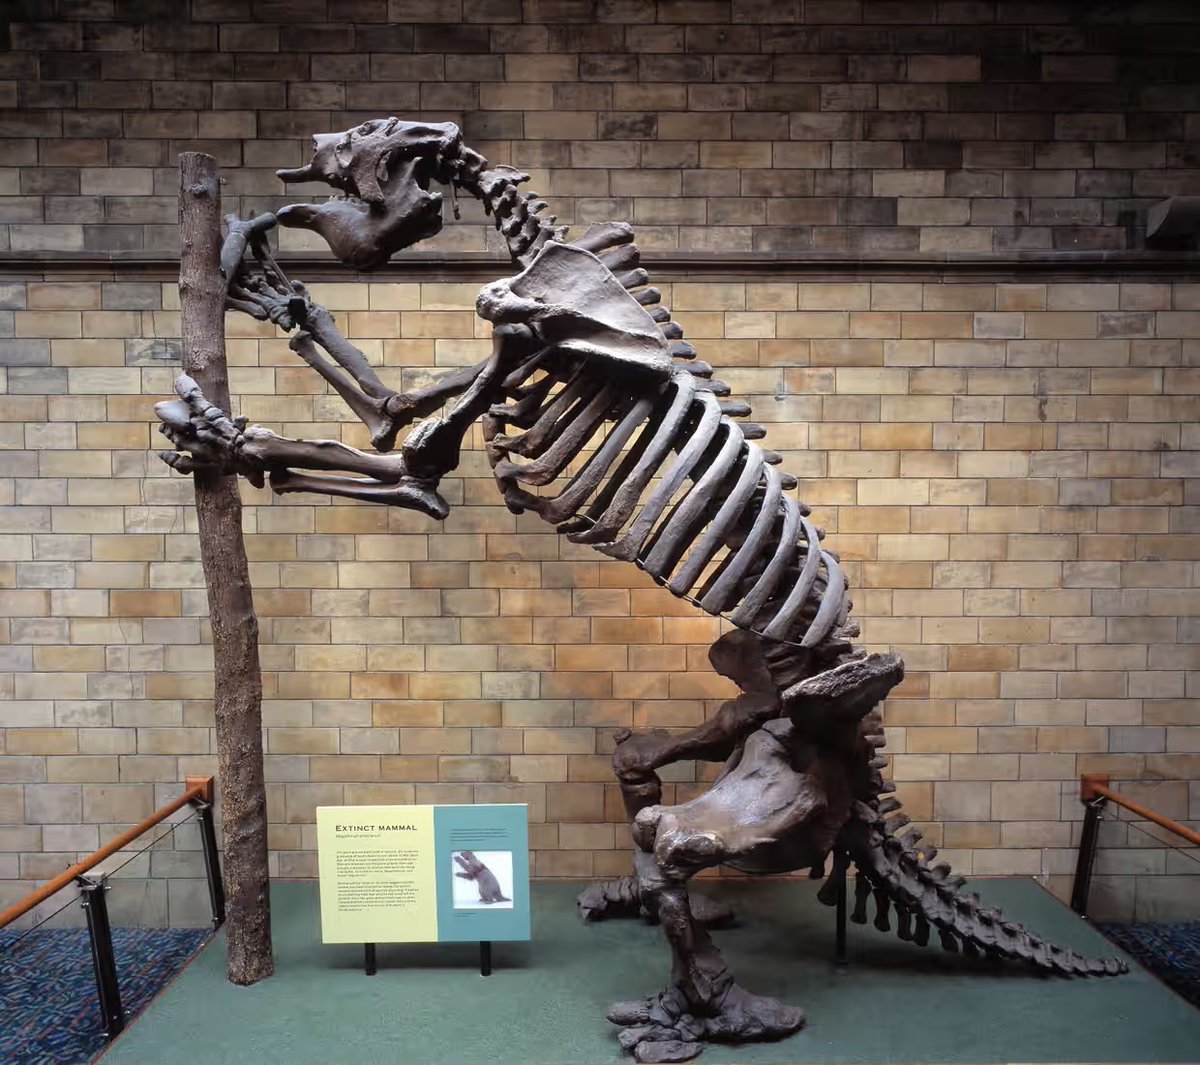 In Argentina in 1832, Charles Darwin collected his first large vertebrate fossil: Megatherium, a giant ground sloth. He soon realized that studying fossils was essential for understanding how evolution worked. #FossilFriday #DarwinDay #DarwinDay2024 #evolution #SciComm